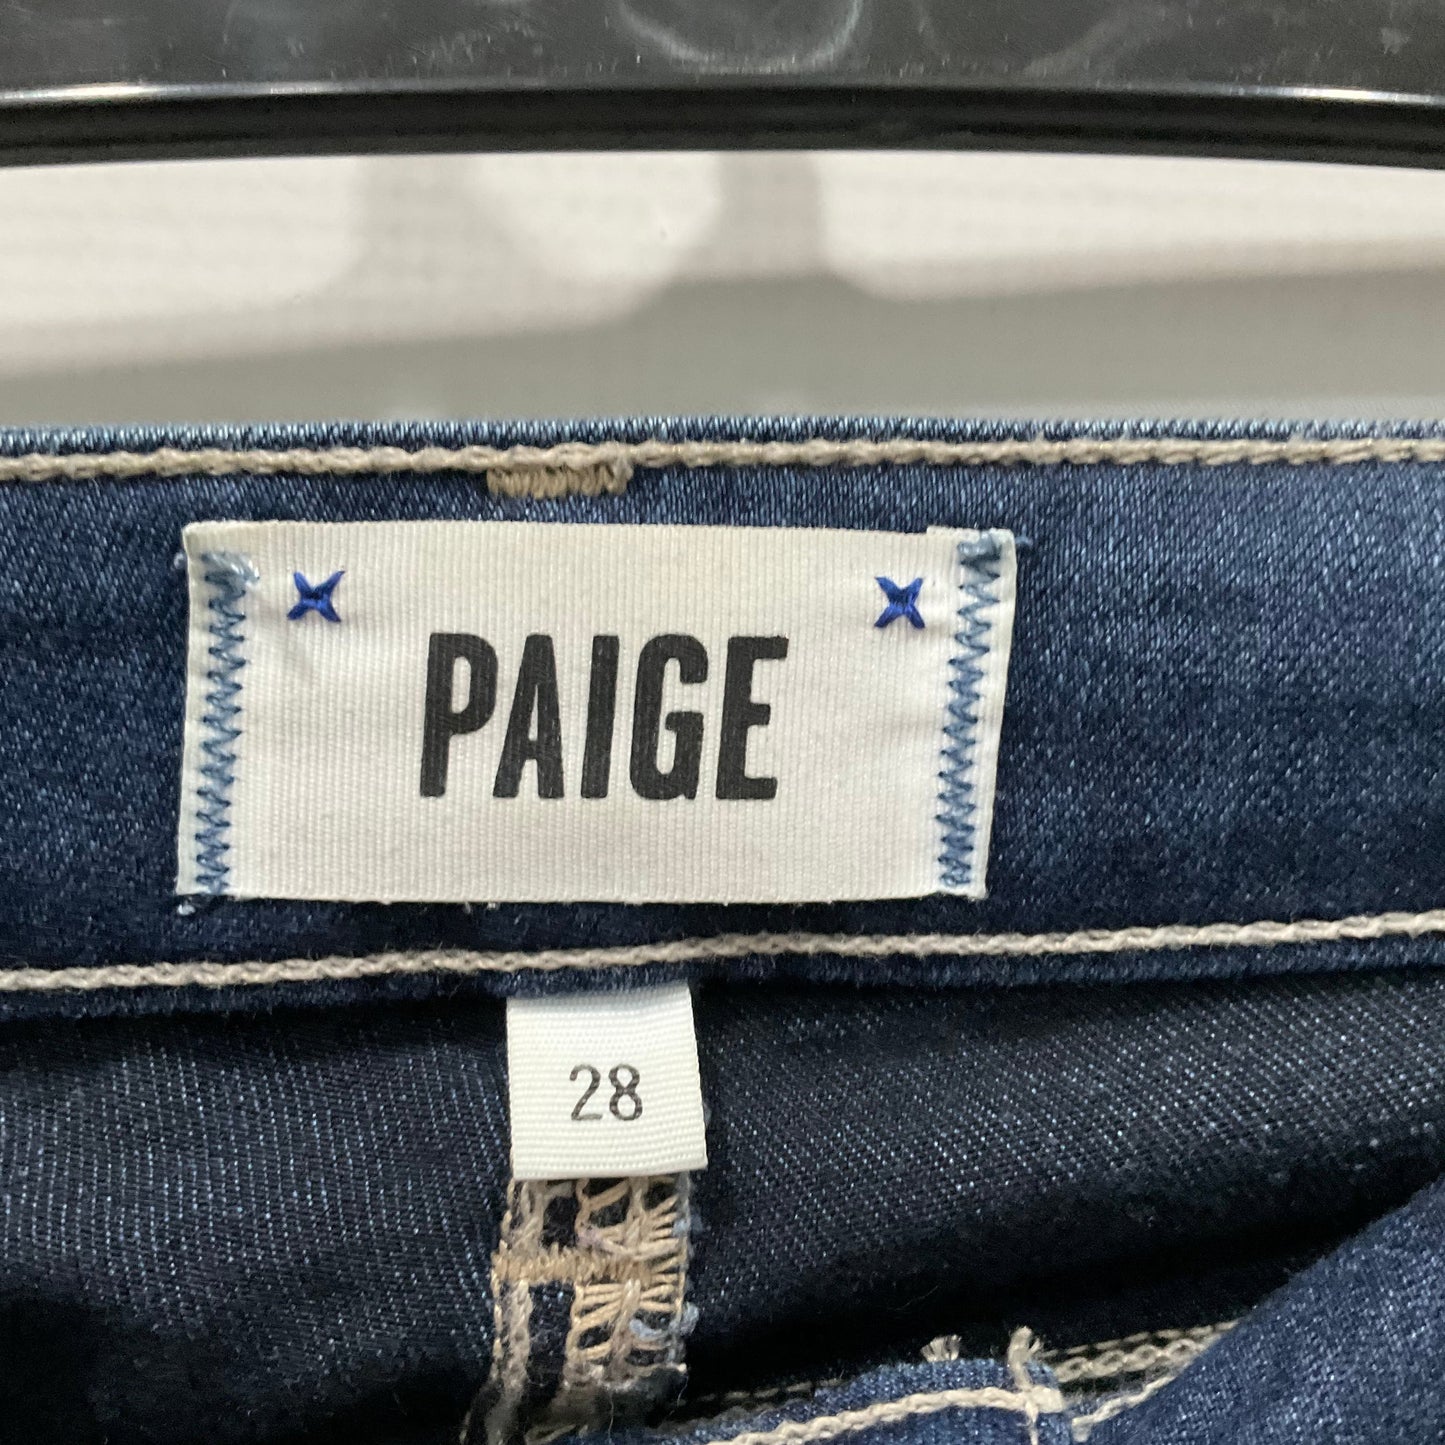 Jeans Skinny By Paige  Size: 6